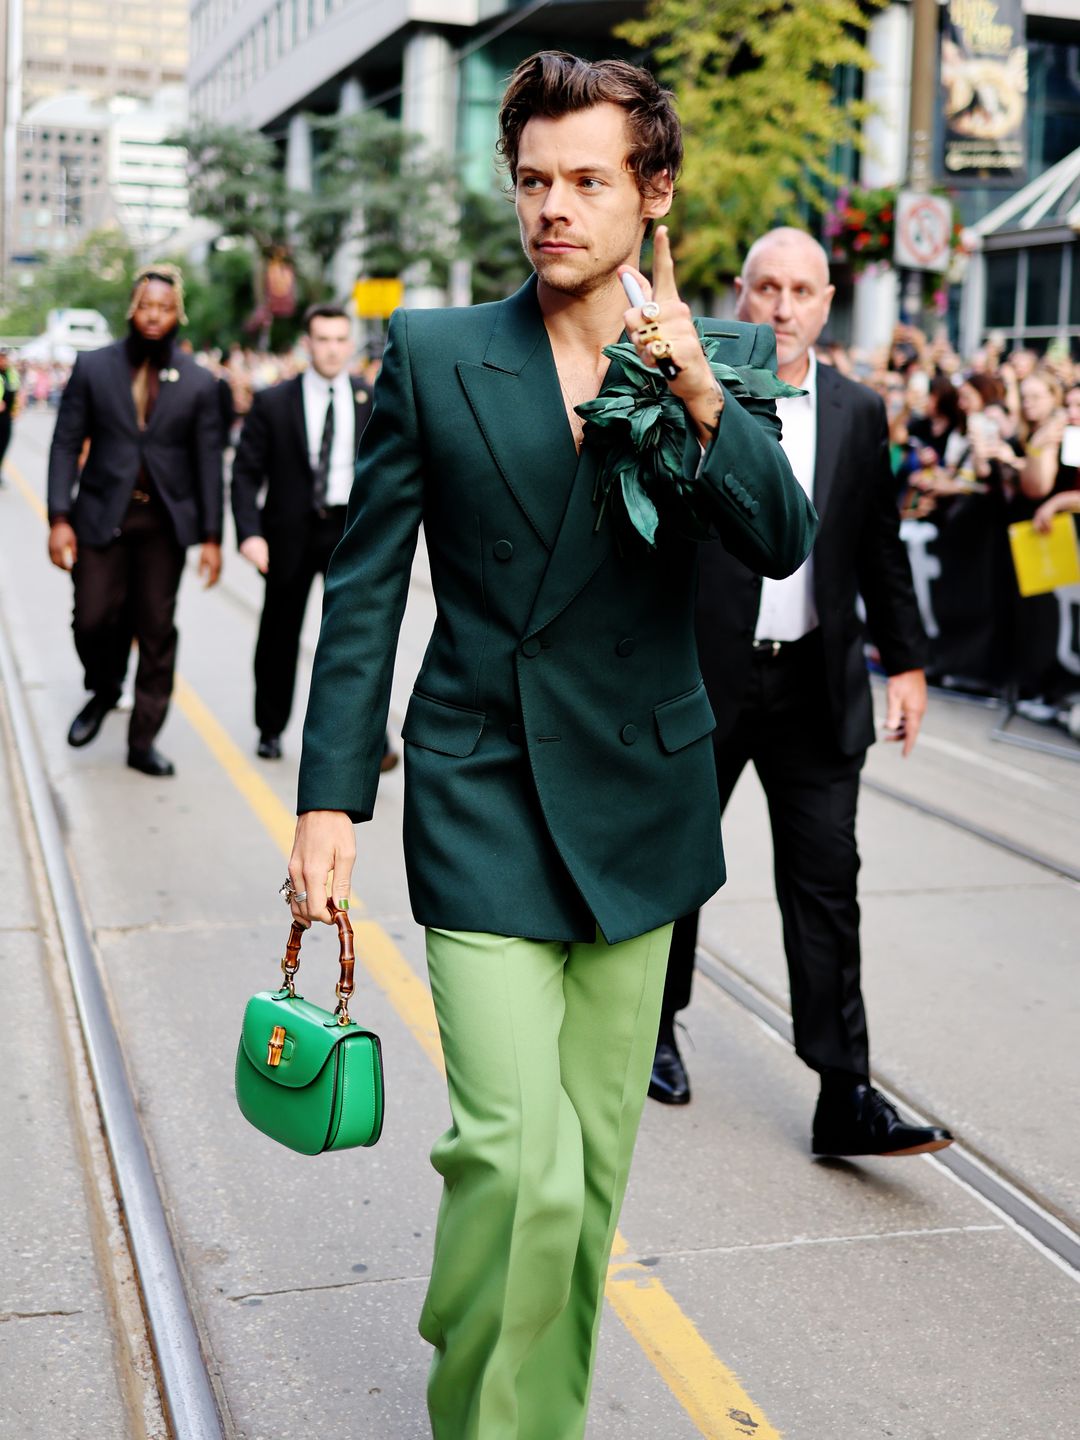 Harry Styles attends the "My Policeman" Premiere during the 2022 Toronto International Film Festival wearing a green suit and hand bag